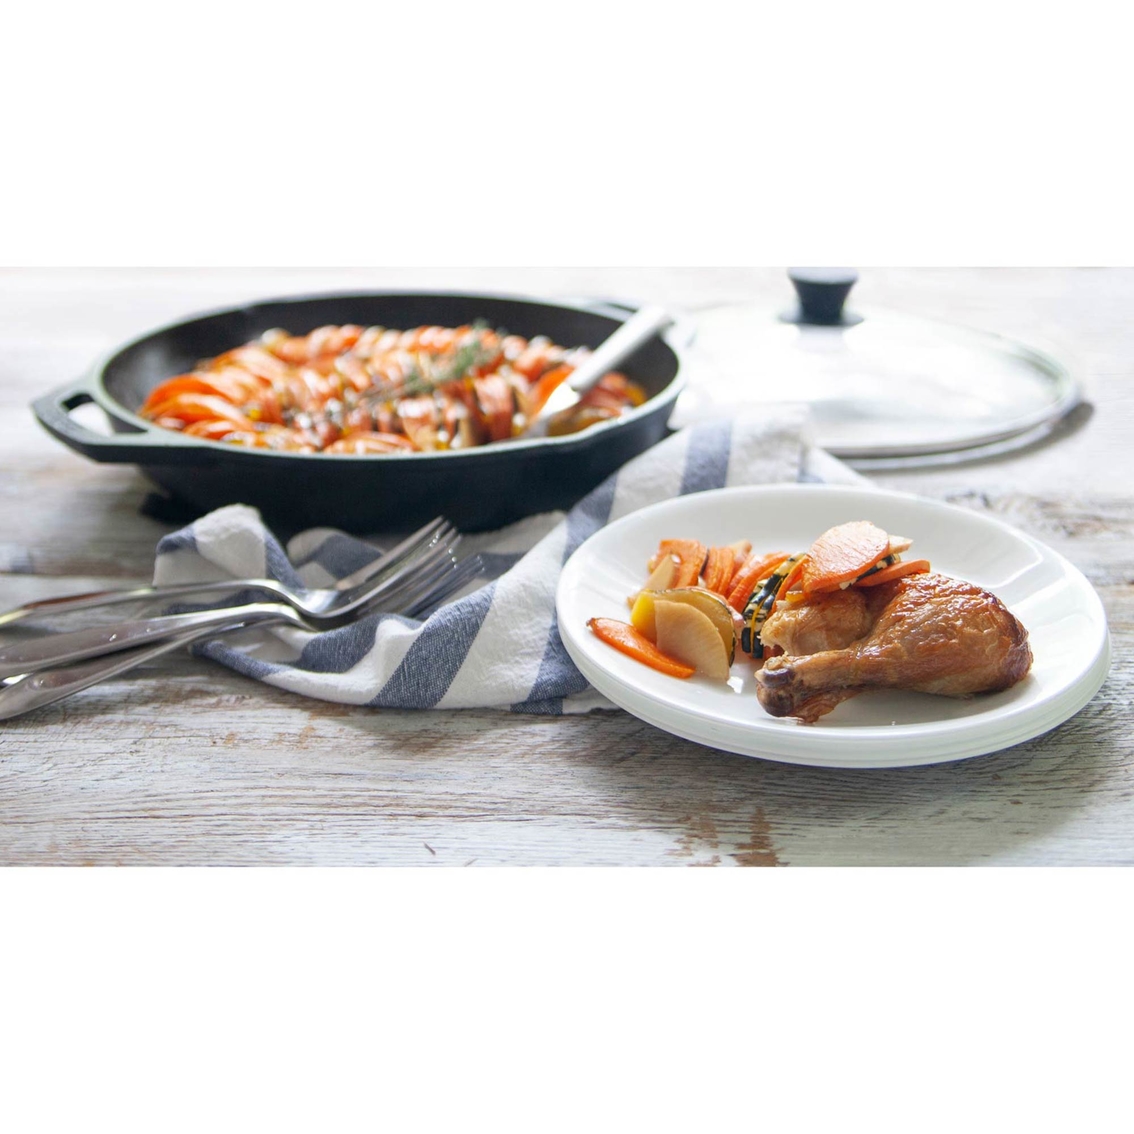 Lodge Chef Collection 12 Inch Cast Iron Everyday Pan with Glass Lid